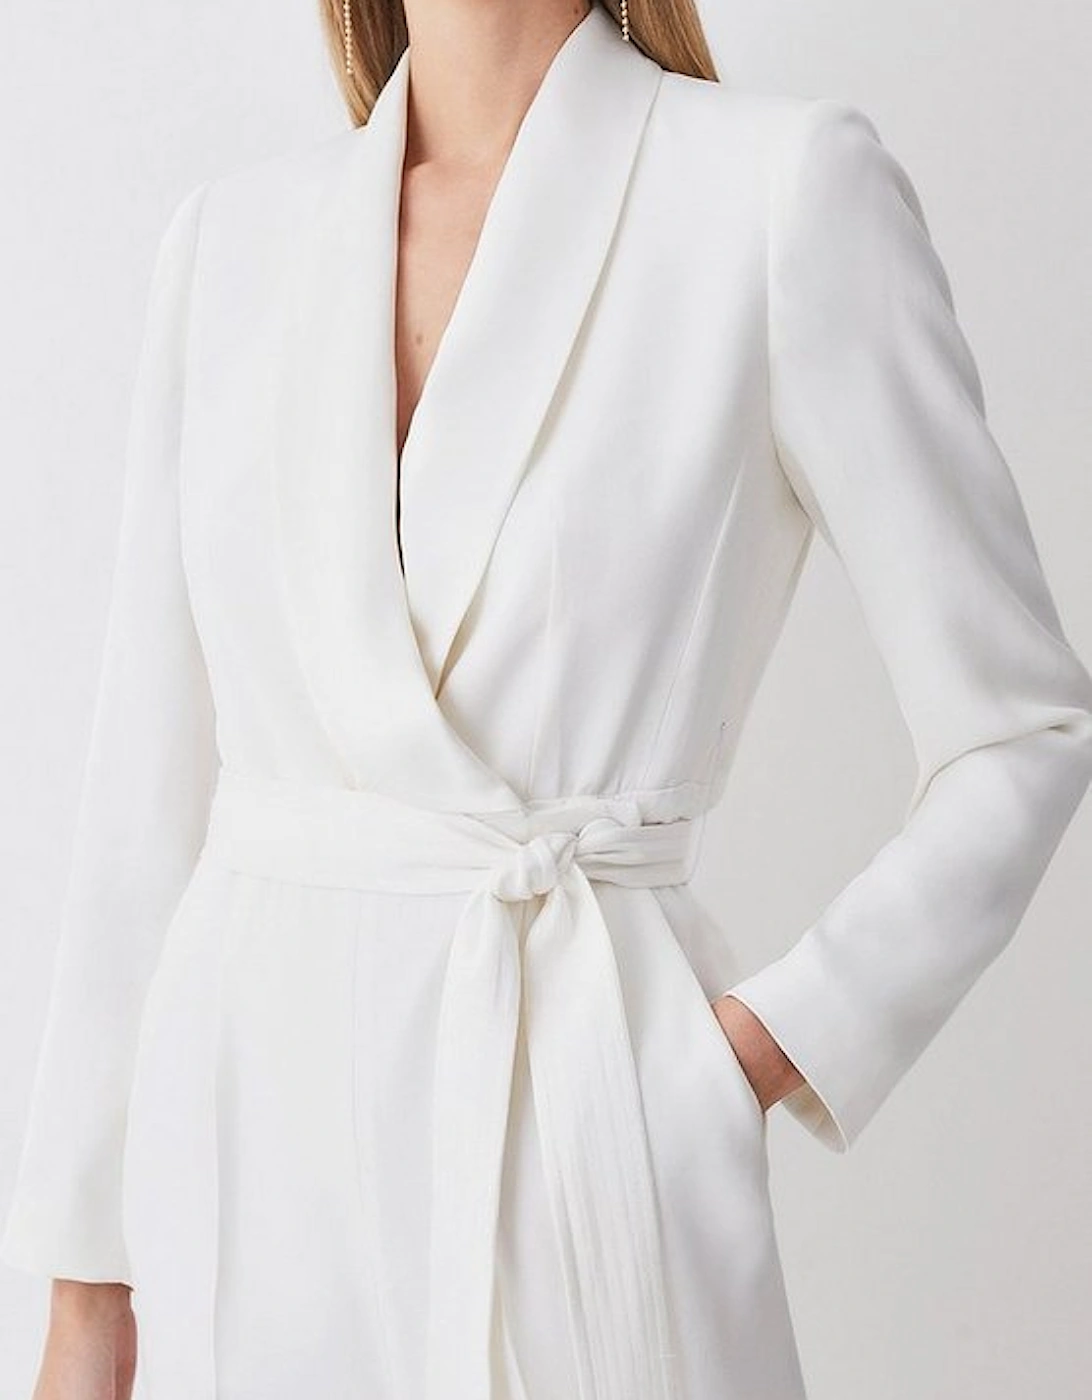 Tailored Tuxedo Belted Wrap Jumpsuit